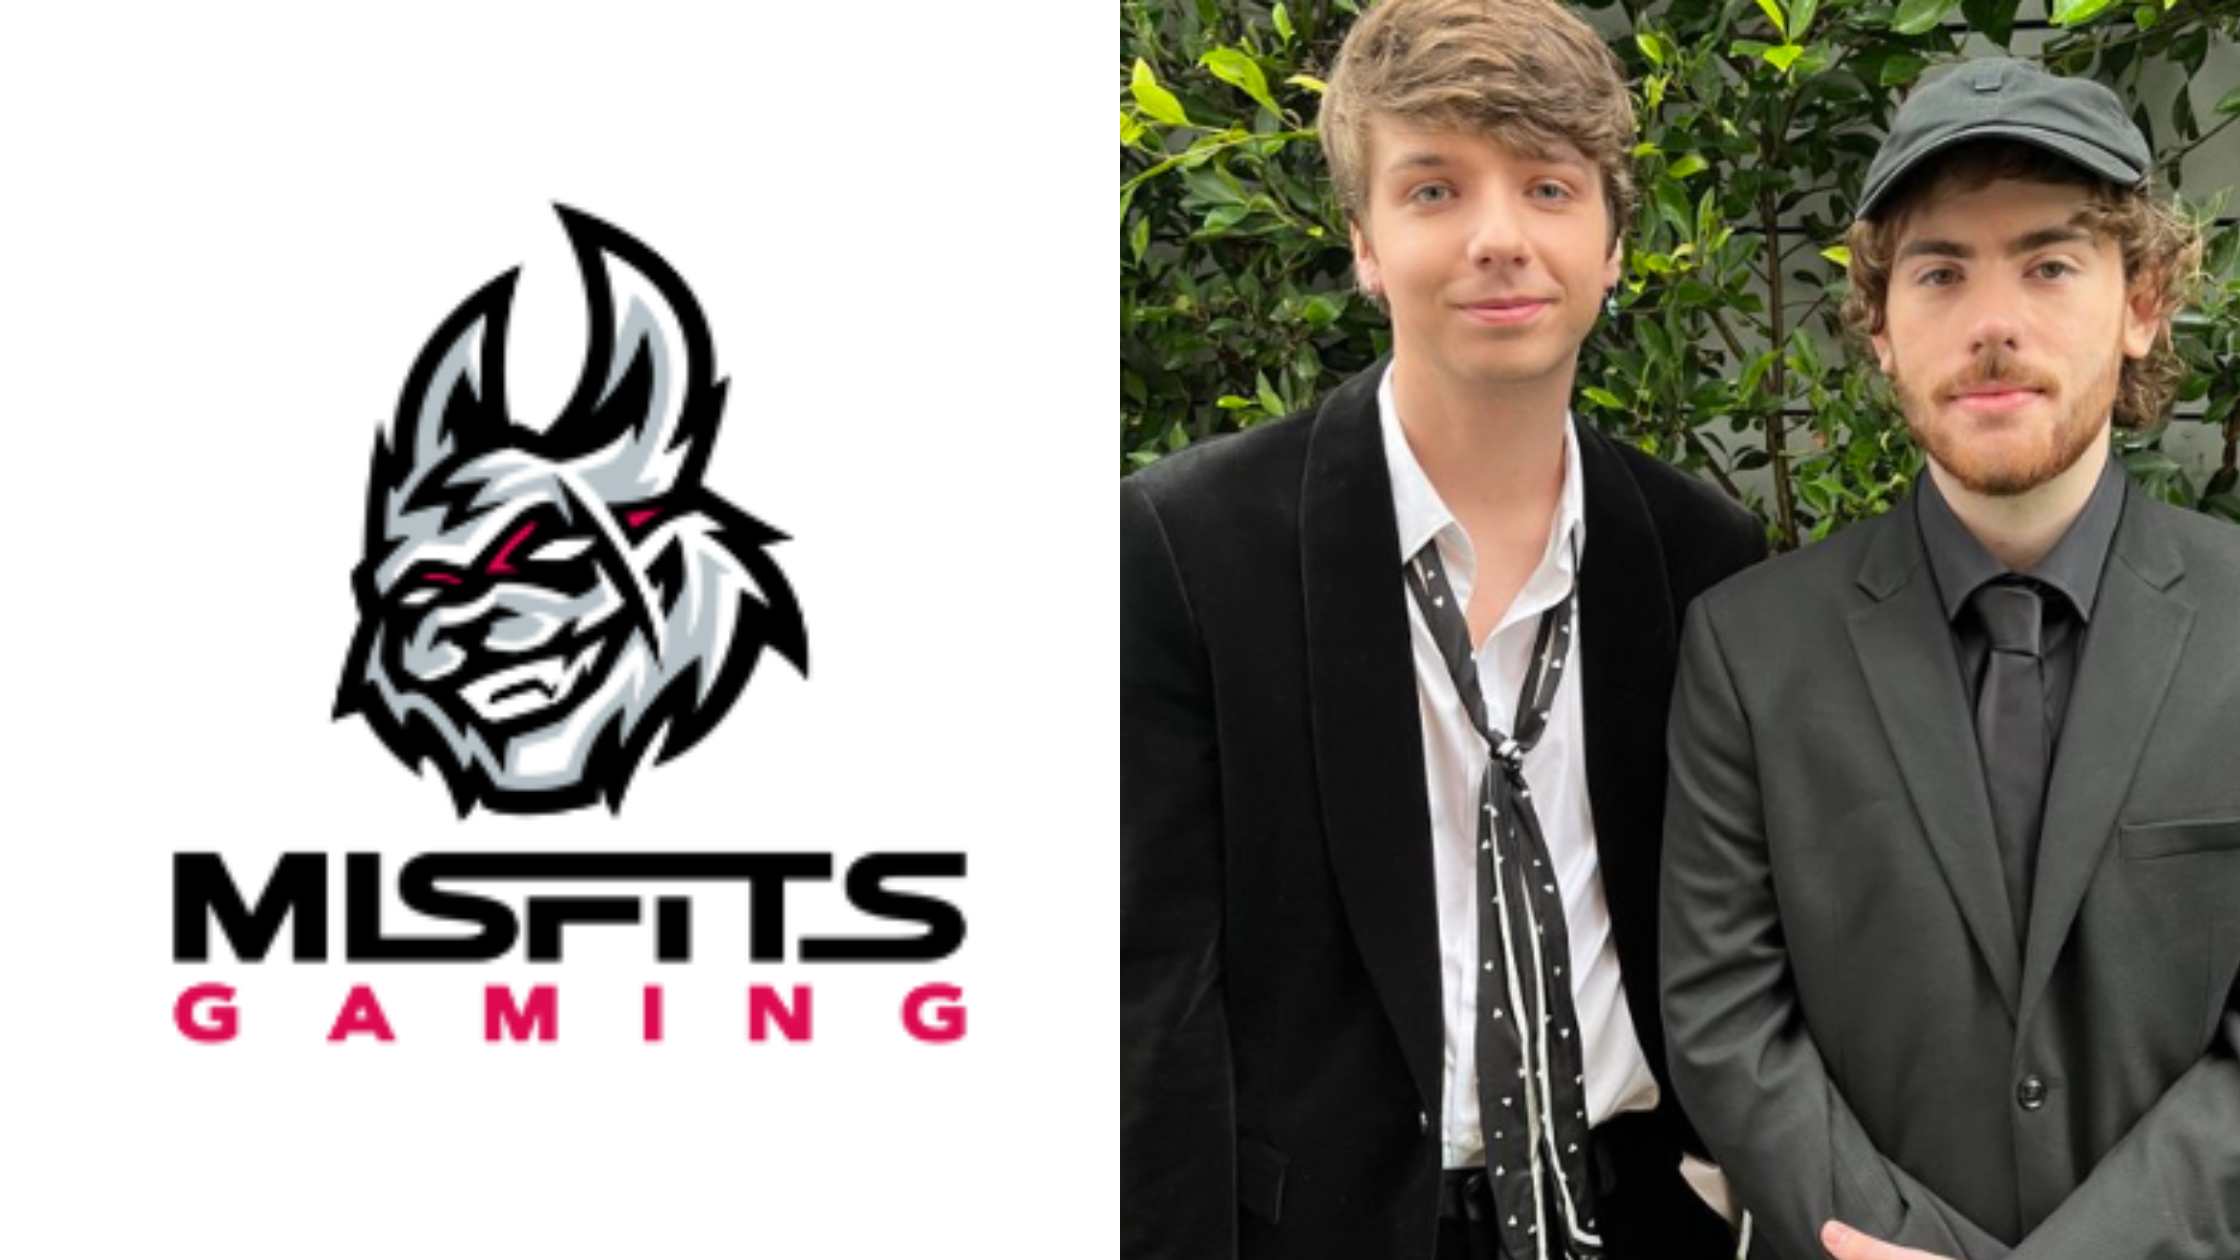 MrBeast's Karl Jacob is excited to announce that he is now a co-owner of Misfits Gaming.